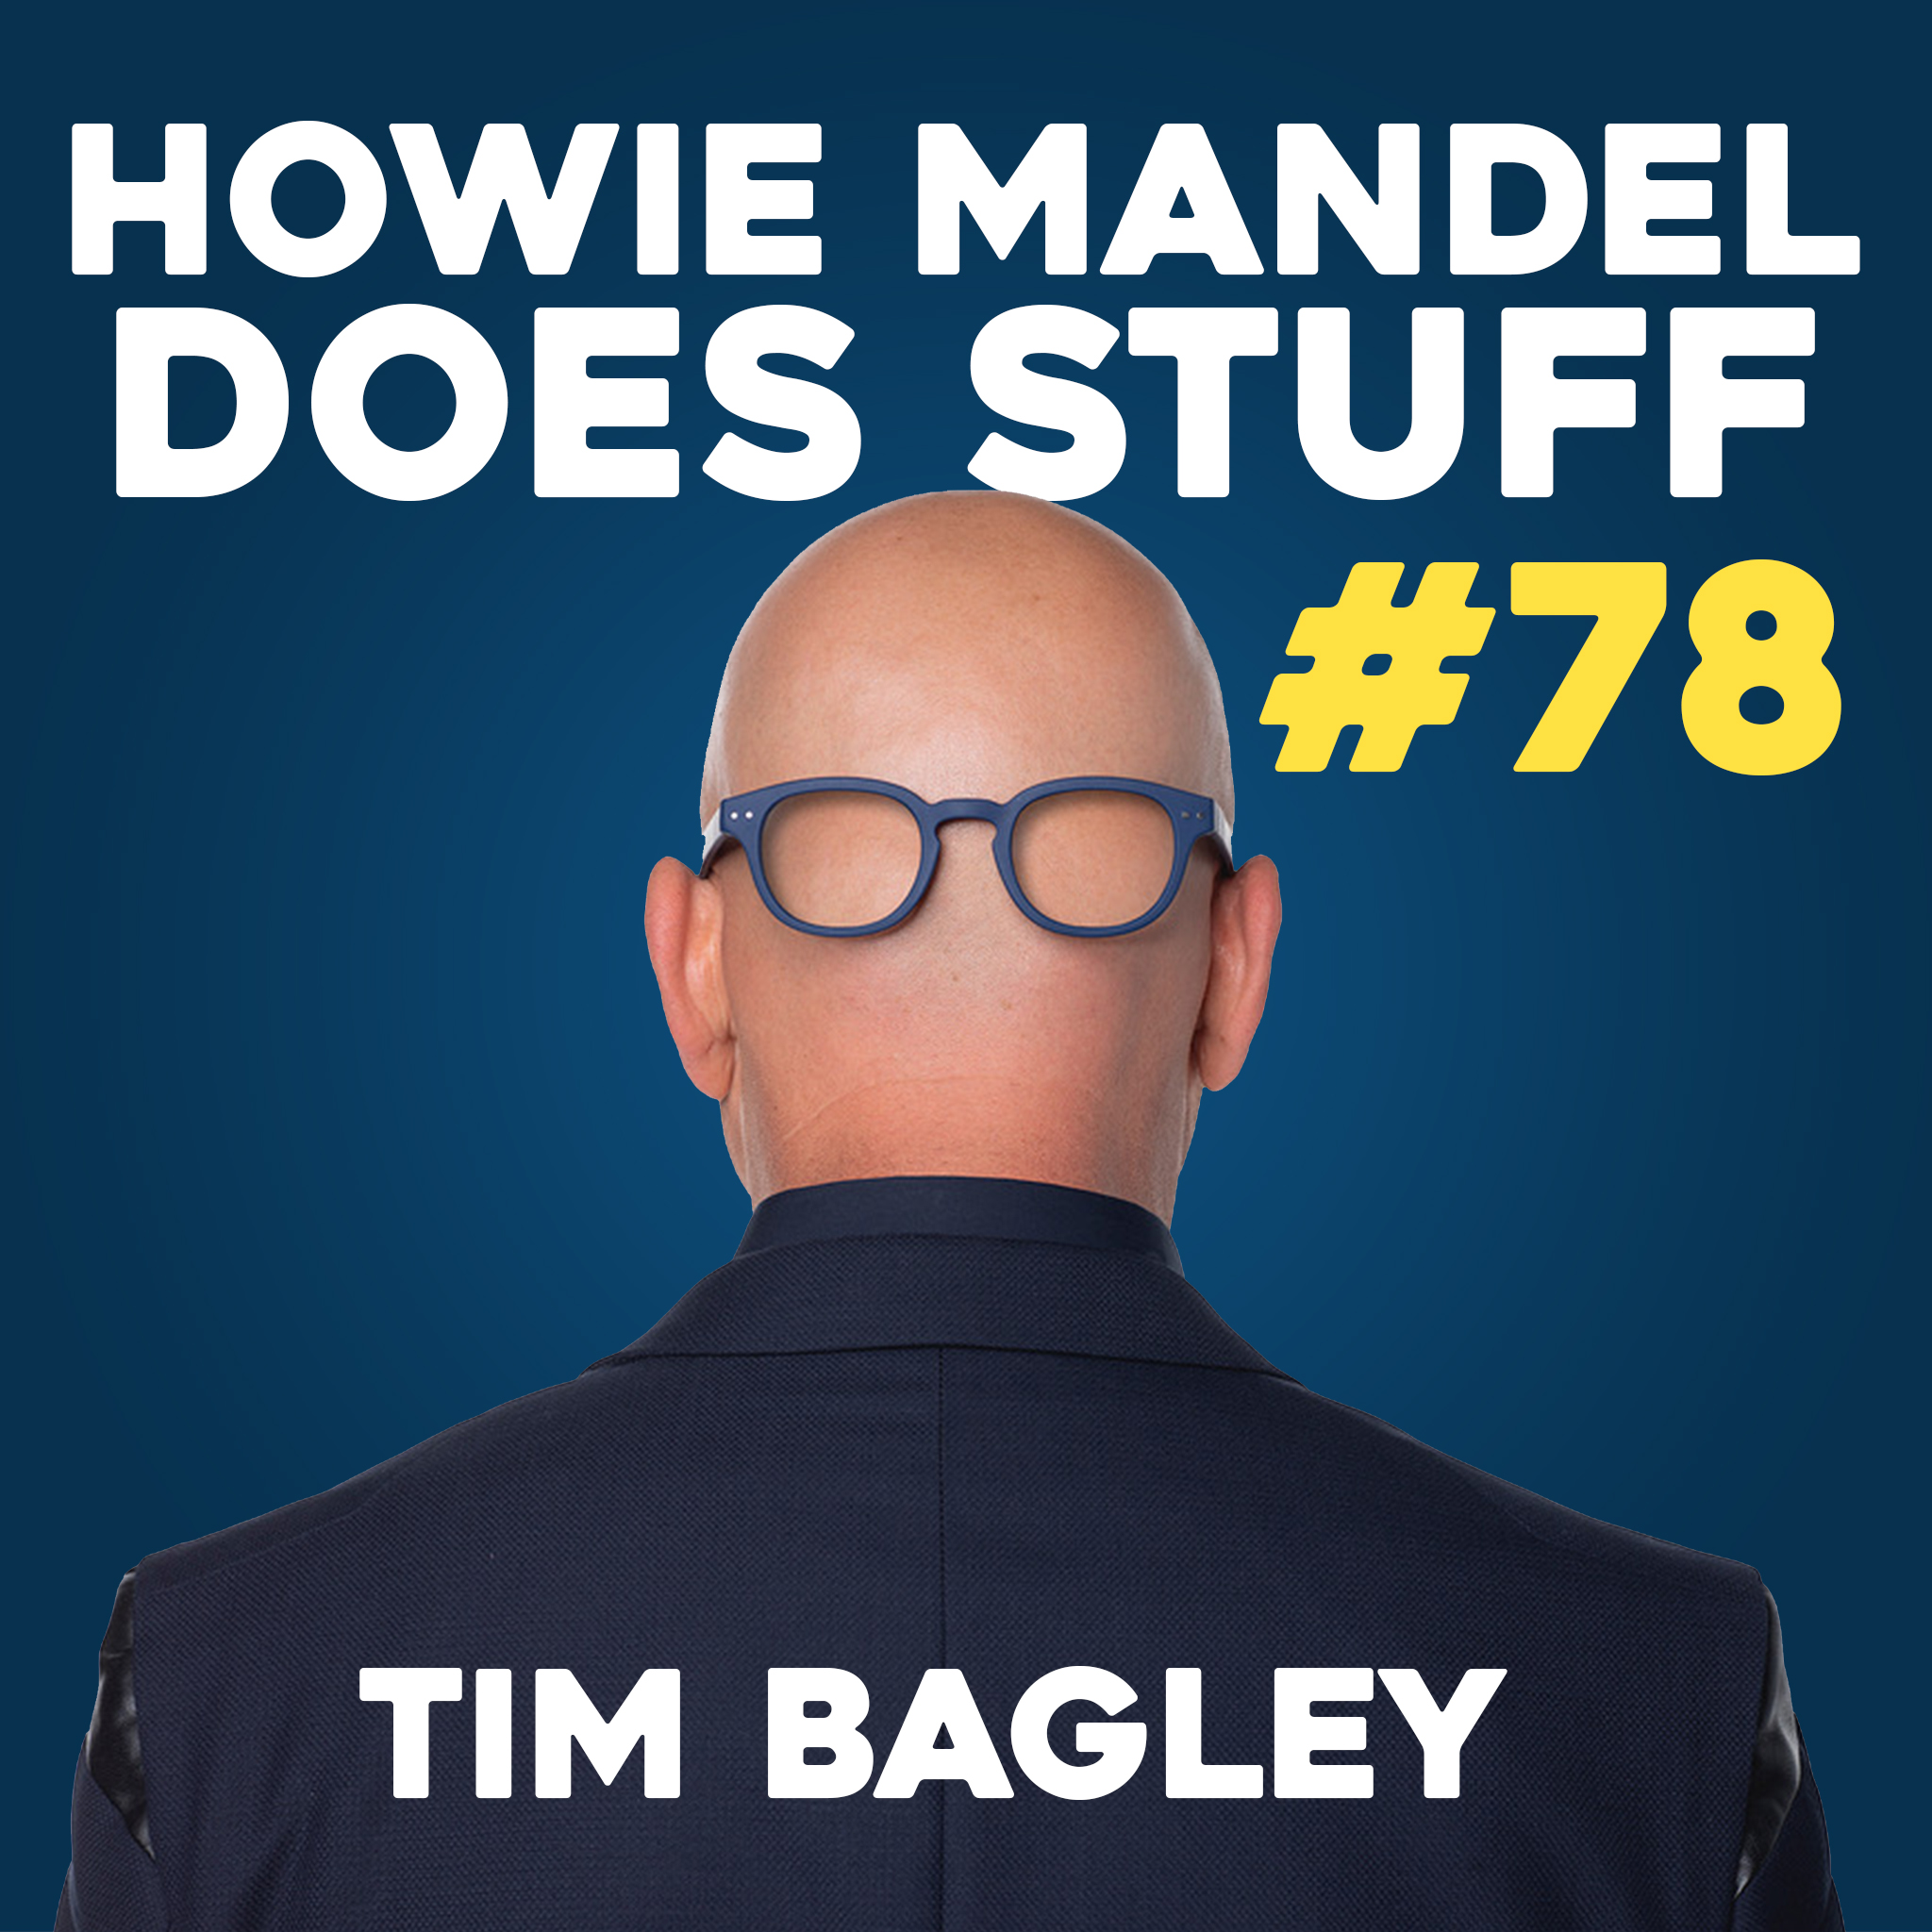 Tim Bagley Reveals the Biggest Secrets of the Playboy Mansion from his Butler Days | Howie Mandel Does Stuff #78